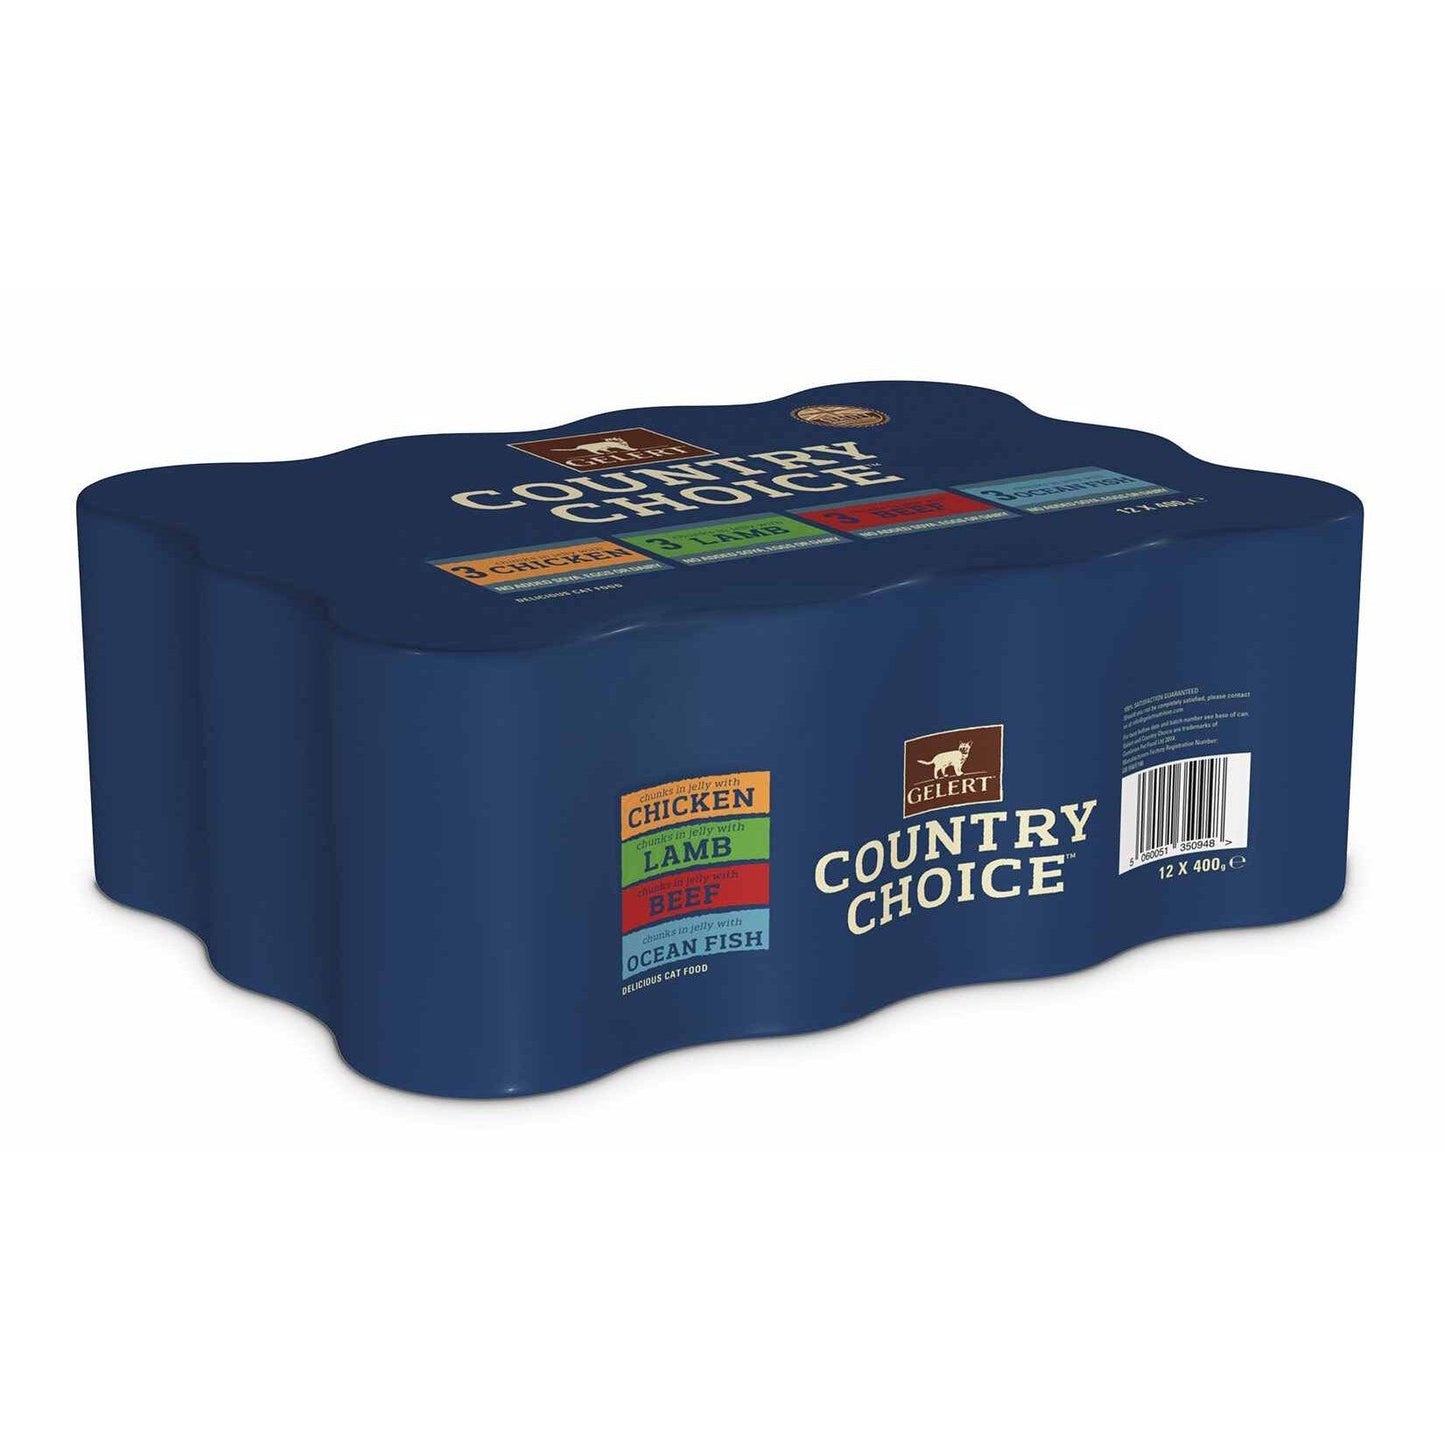 Gelert Country Choice Adult Cat Variety in Jelly Cat Food 12 x 400g - North East Pet Shop Gelert